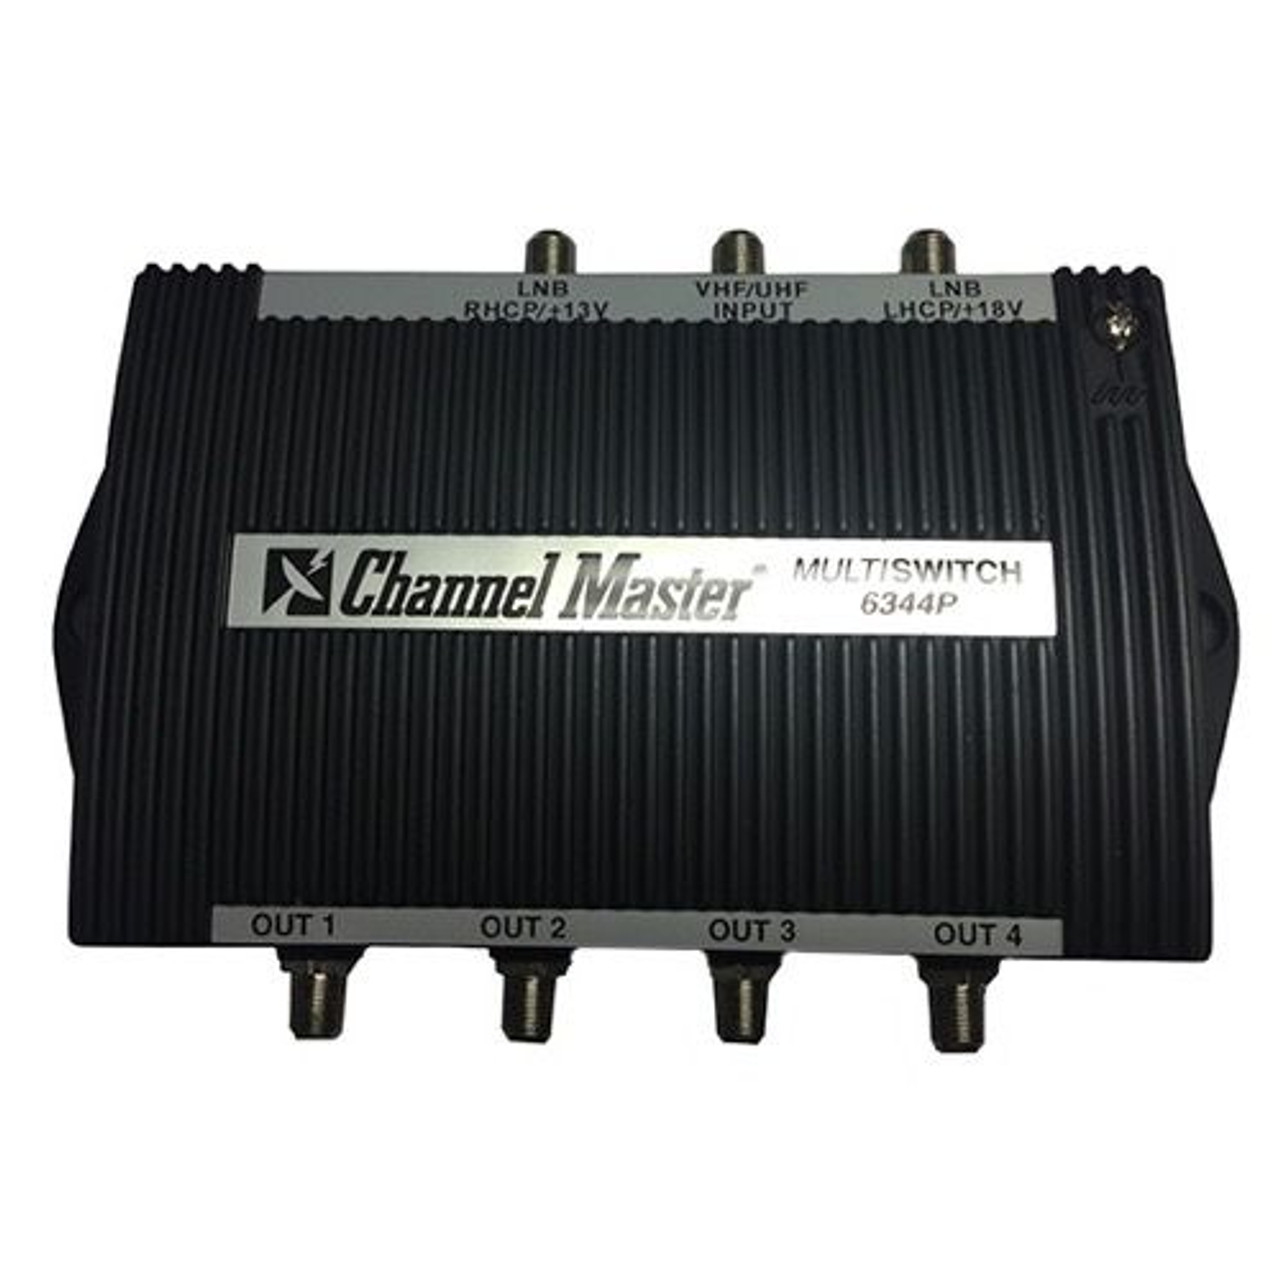 Channel Master 6344P 3X4 Satellite IF Multi-Switch 4 Output Amplified Off-Air Input VHF/UHF DIRECTV FTA 950 - 2150 MHz 2 GHz Commercial Grade CM-6344-P IF 4 Set Multiswitch with Off-Air/Cable Input